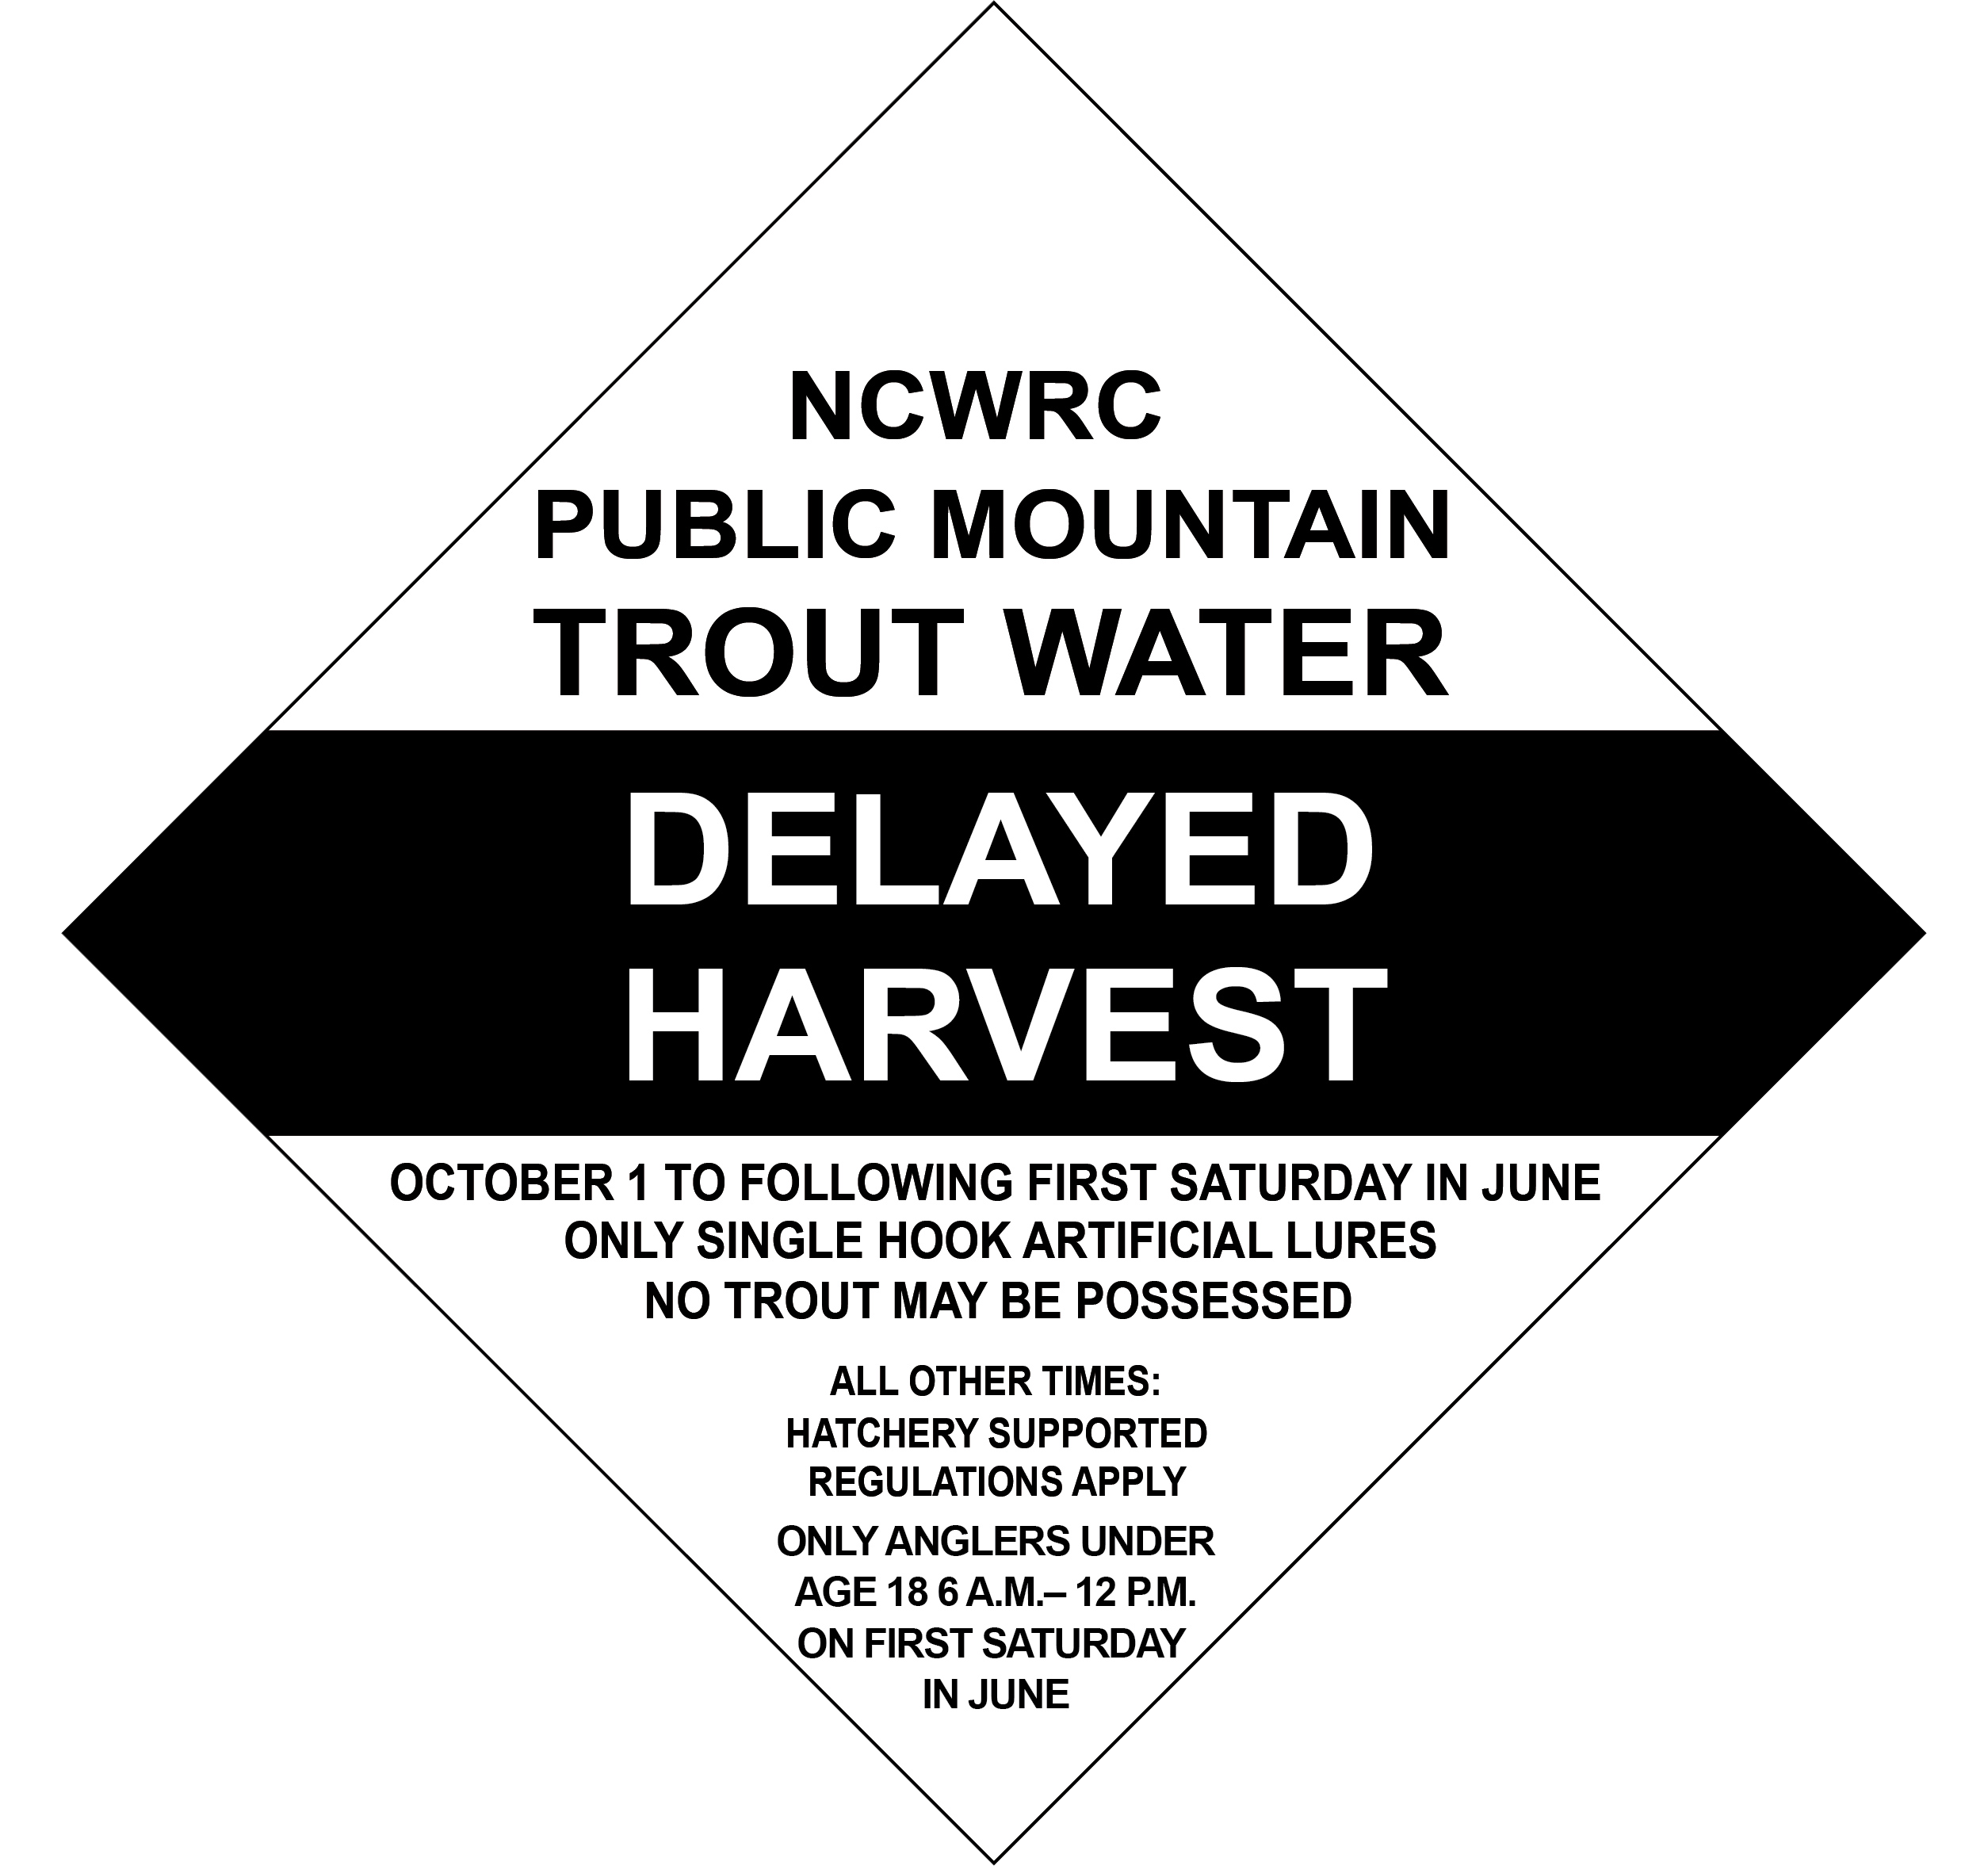 Delayed Harvest Trout Waters